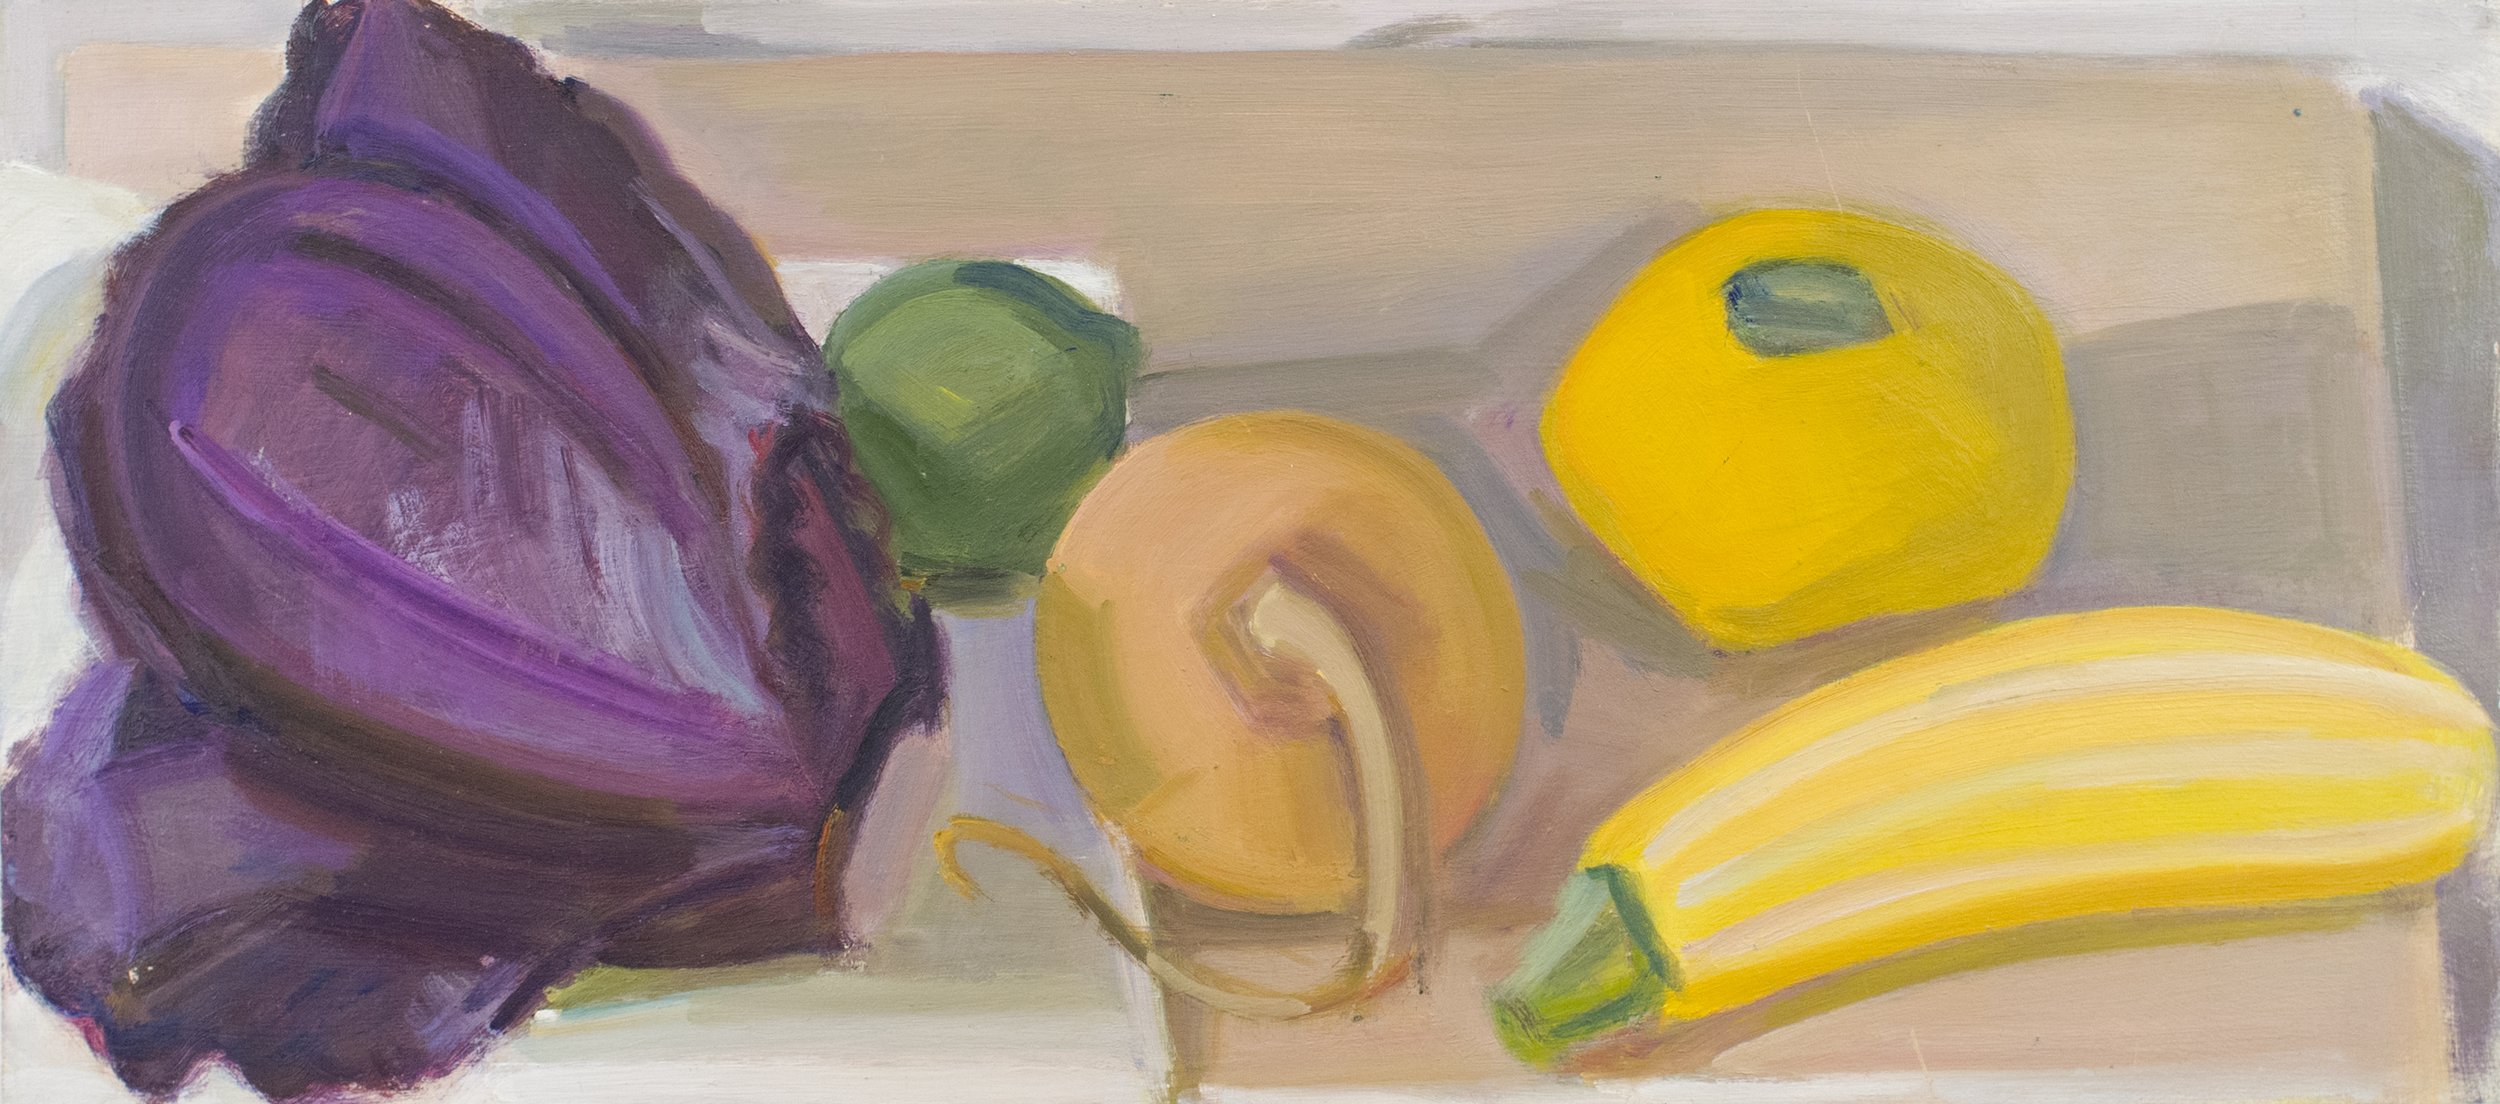   Red Cabbage, Lime, Pattypan and Striped Squash Surrounding Onion , c. 2012, oil/panel (signed and framed by the artist), 8 x 18 in., $1,100 